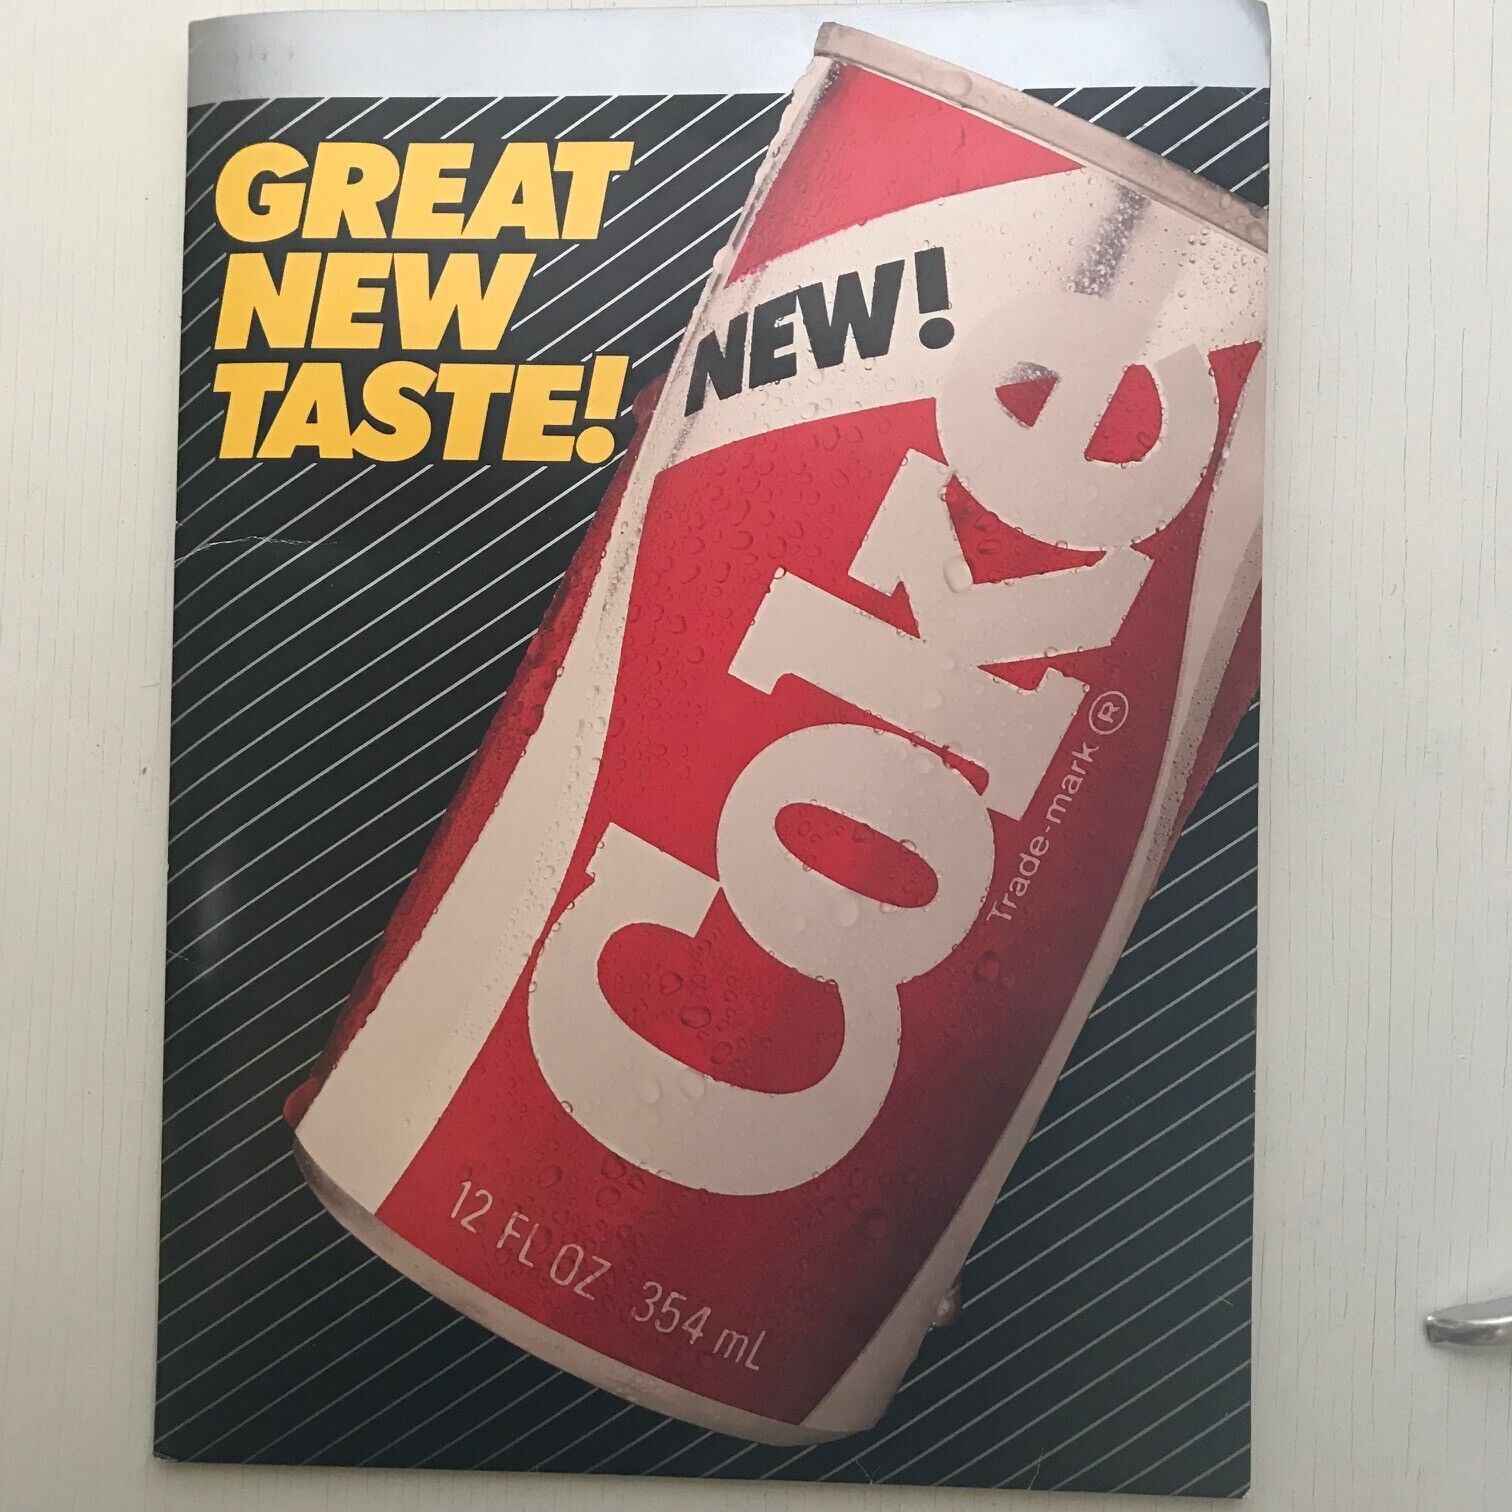 News Release Packet 1985 New Coke "New Taste Of Coca Cola" Fact Sheets Pictures - Picture 1 of 18